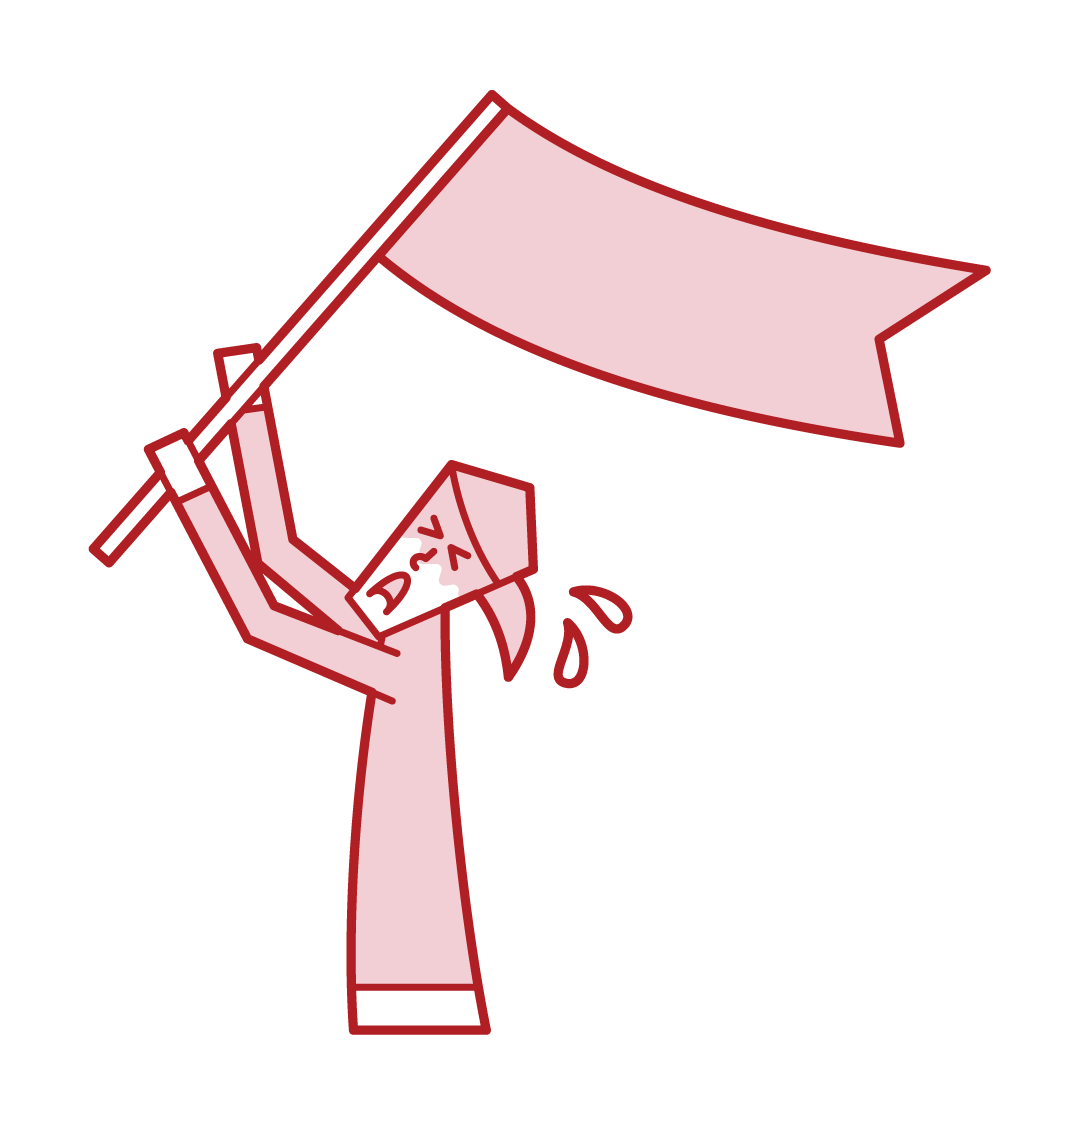 Illustration of a woman waving a flag and asking for SOS